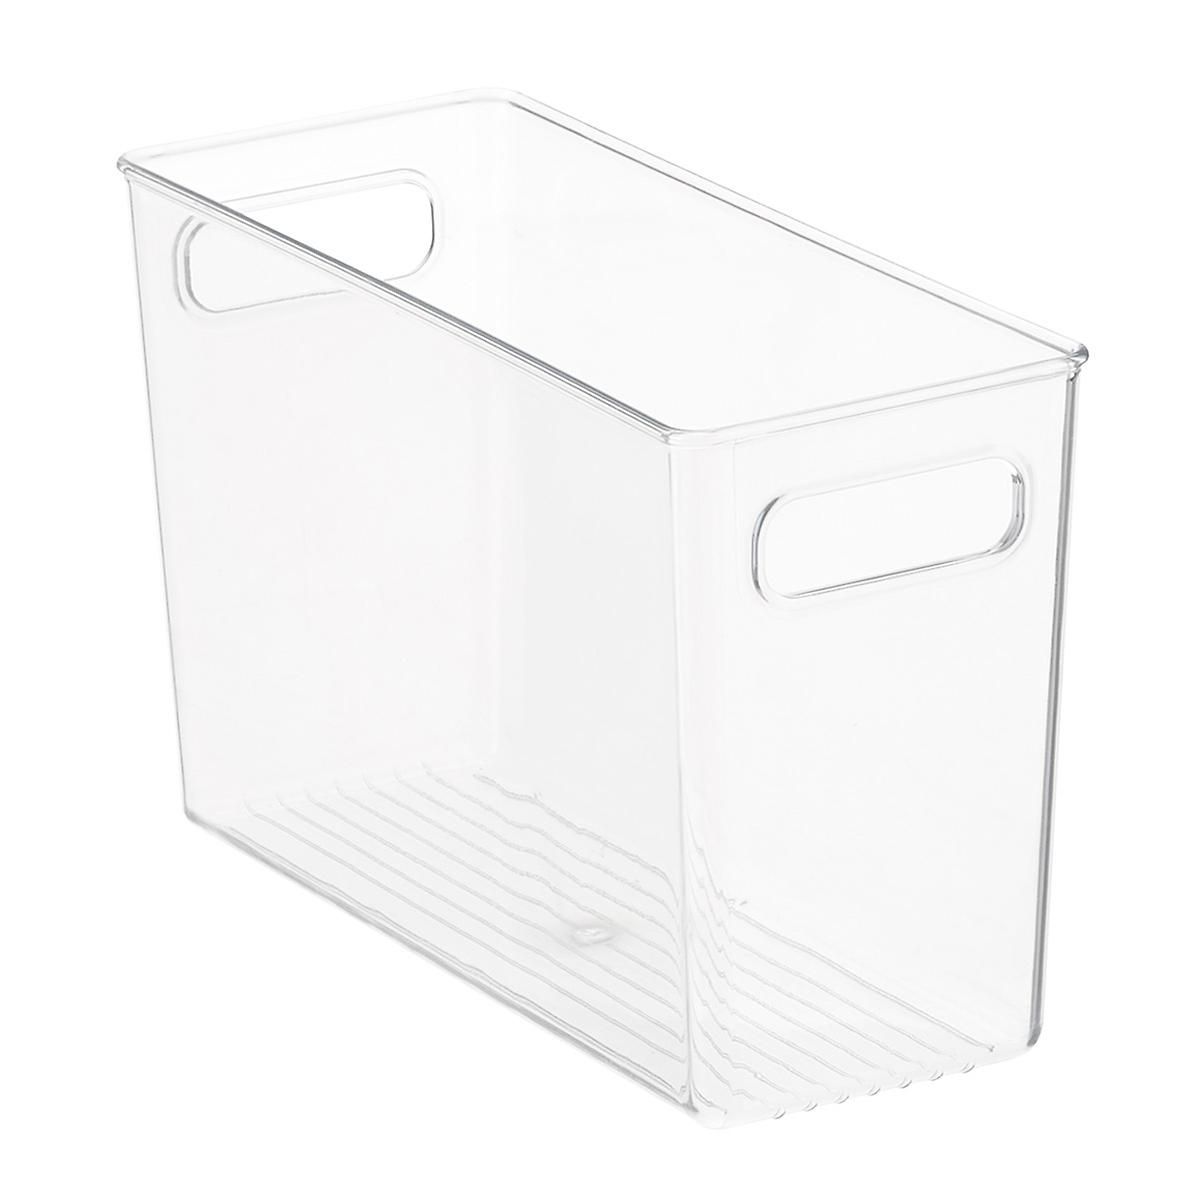 iDESIGN Linus Small Kitchen Bin Clear | The Container Store